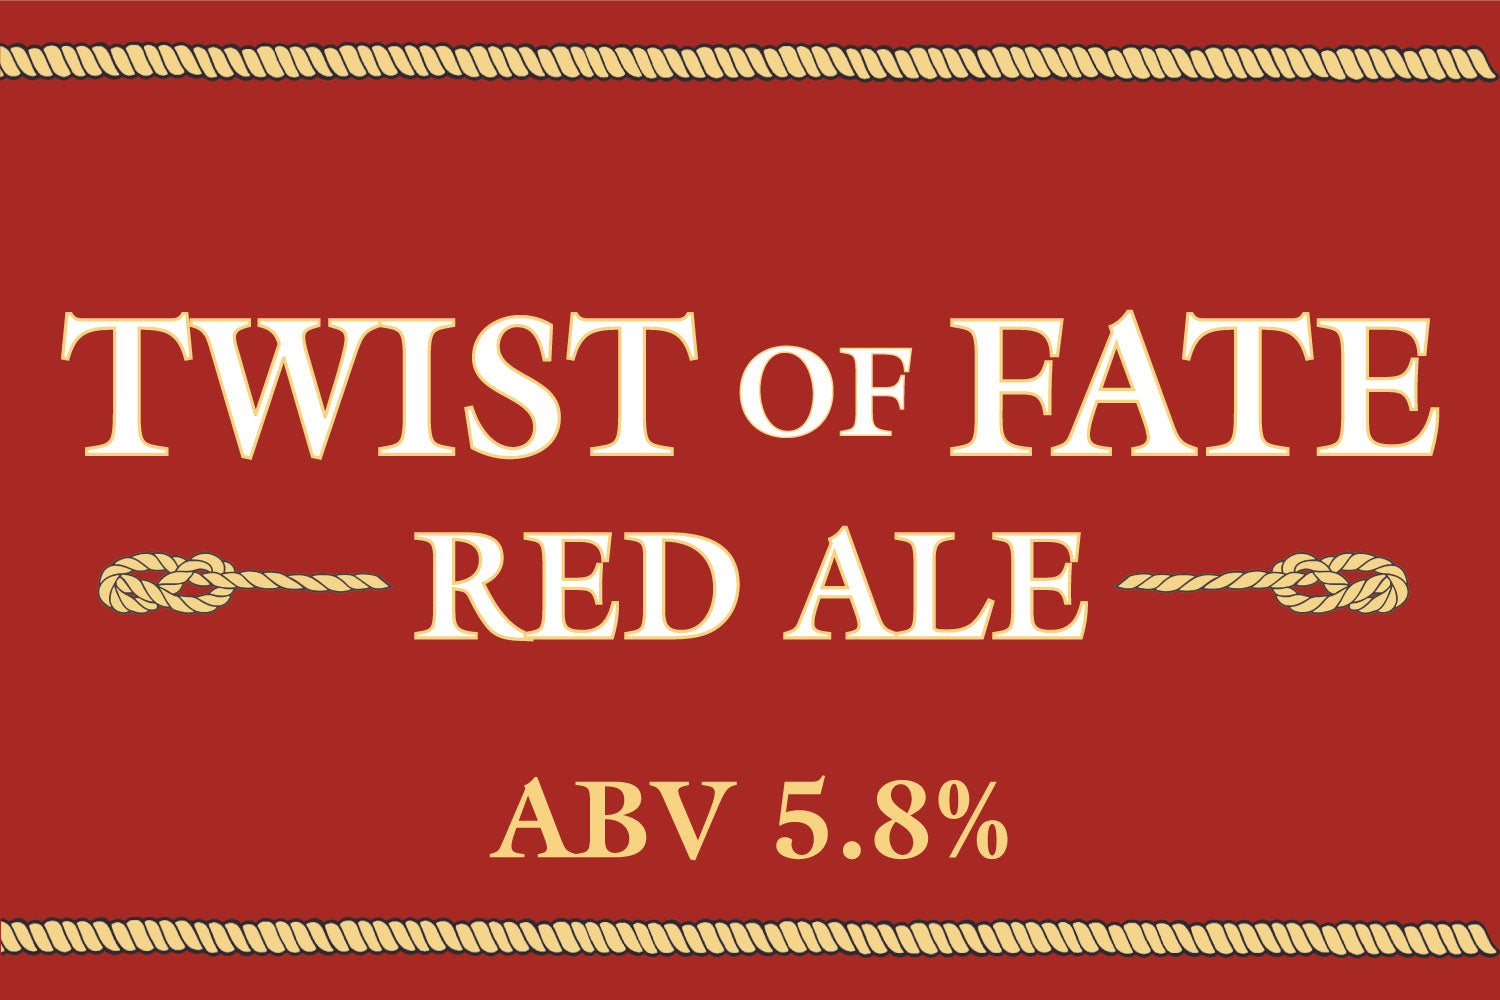 Twist of Fate Red Ale beer sign